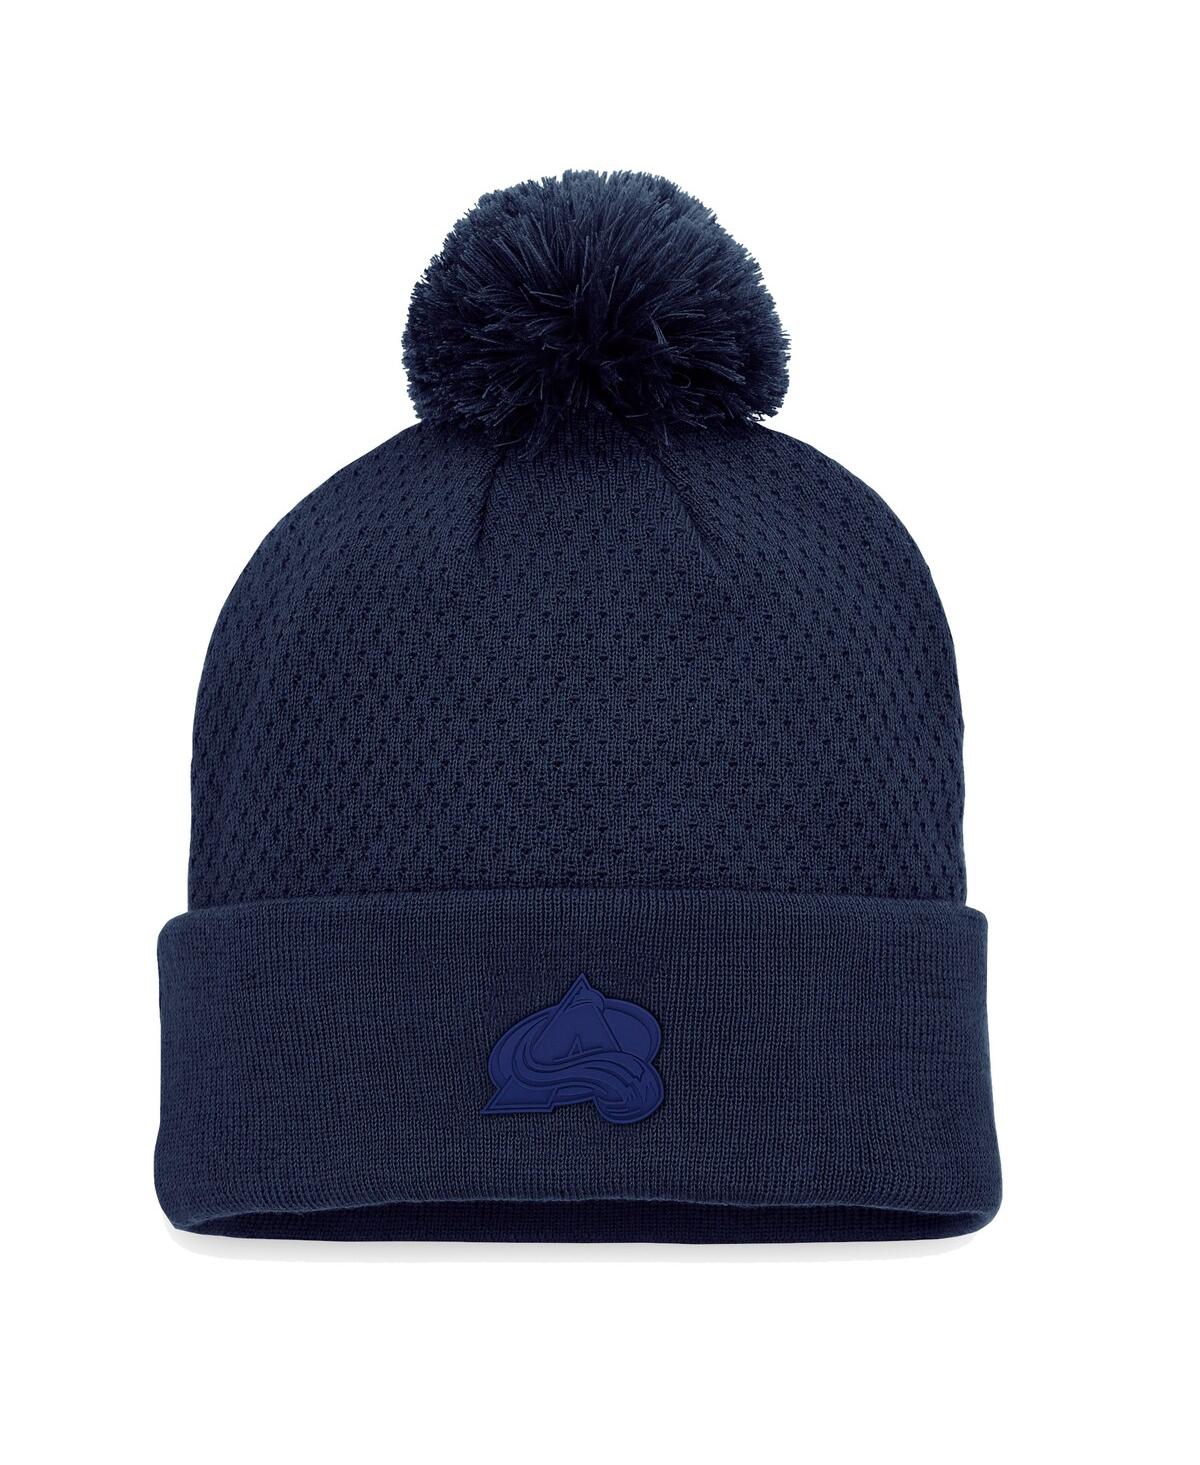 Women's Fanatics Navy Colorado Avalanche Authentic Pro Road Cuffed Knit Hat with Pom - Navy